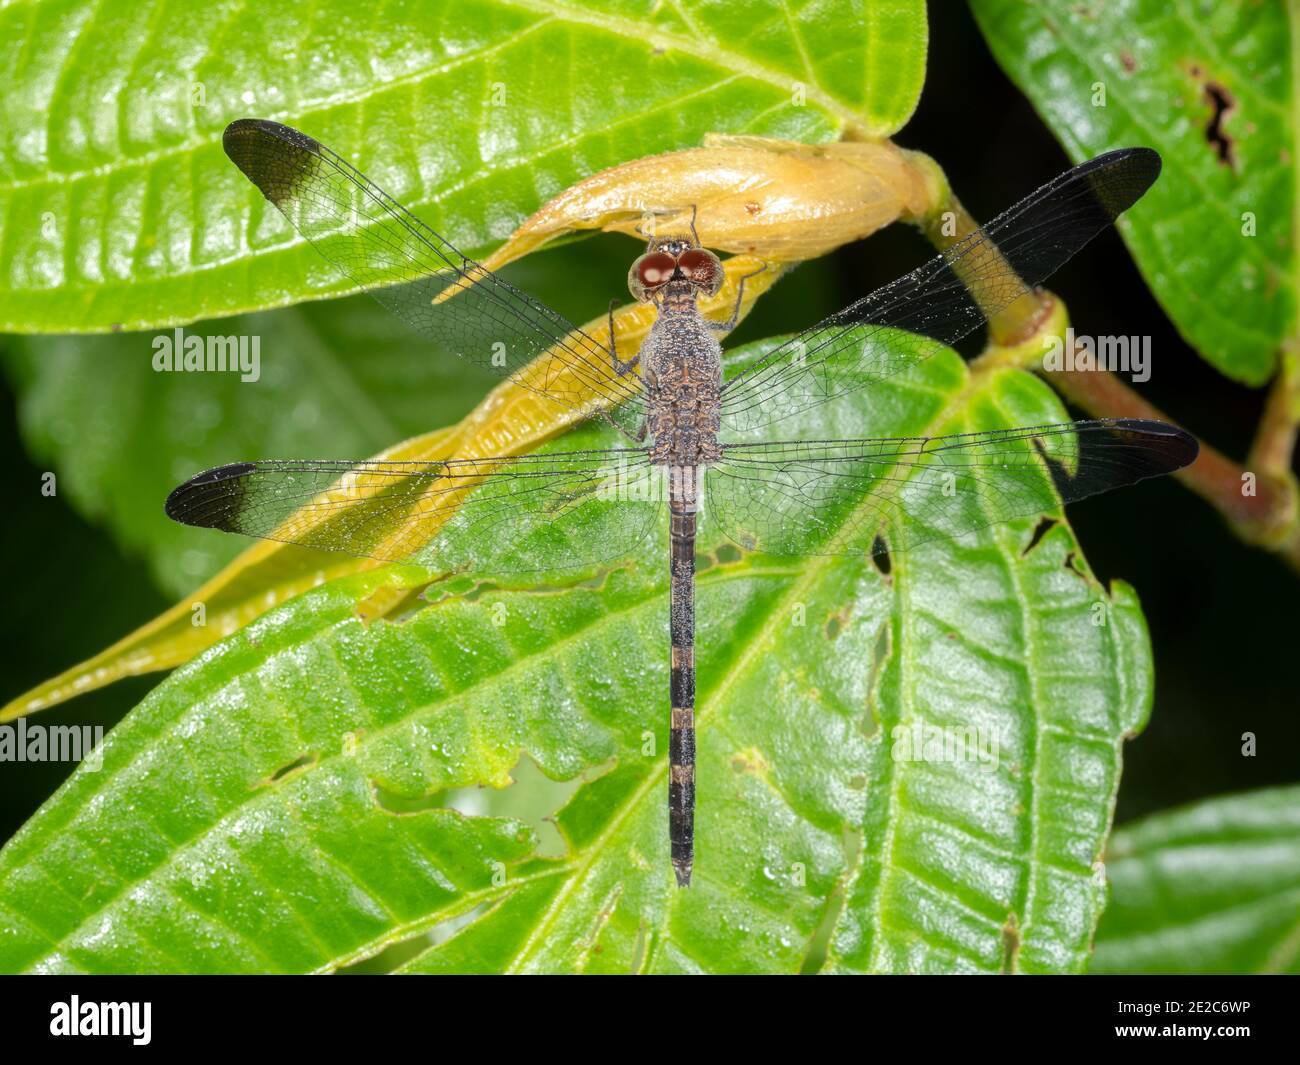 Amazonian dragonfly resting on a leaf in the rainforest, Ecuador Stock Photo